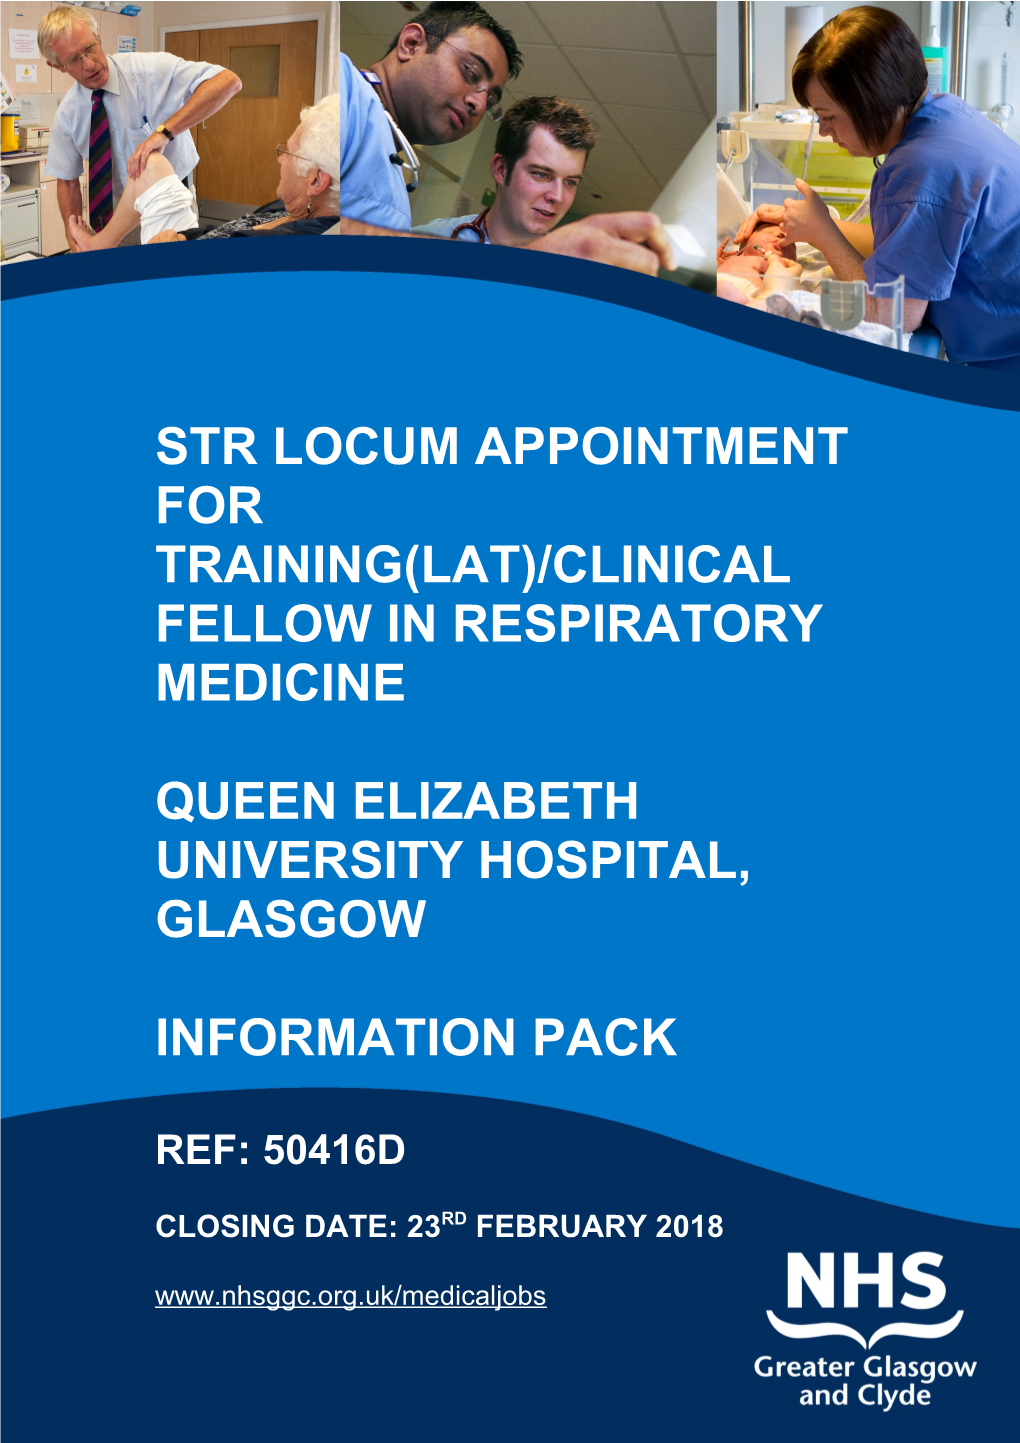 STR LOCUM APPOINTMENT for TRAINING(LAT)/CLINICAL FELLOW in Respiratory Medicine